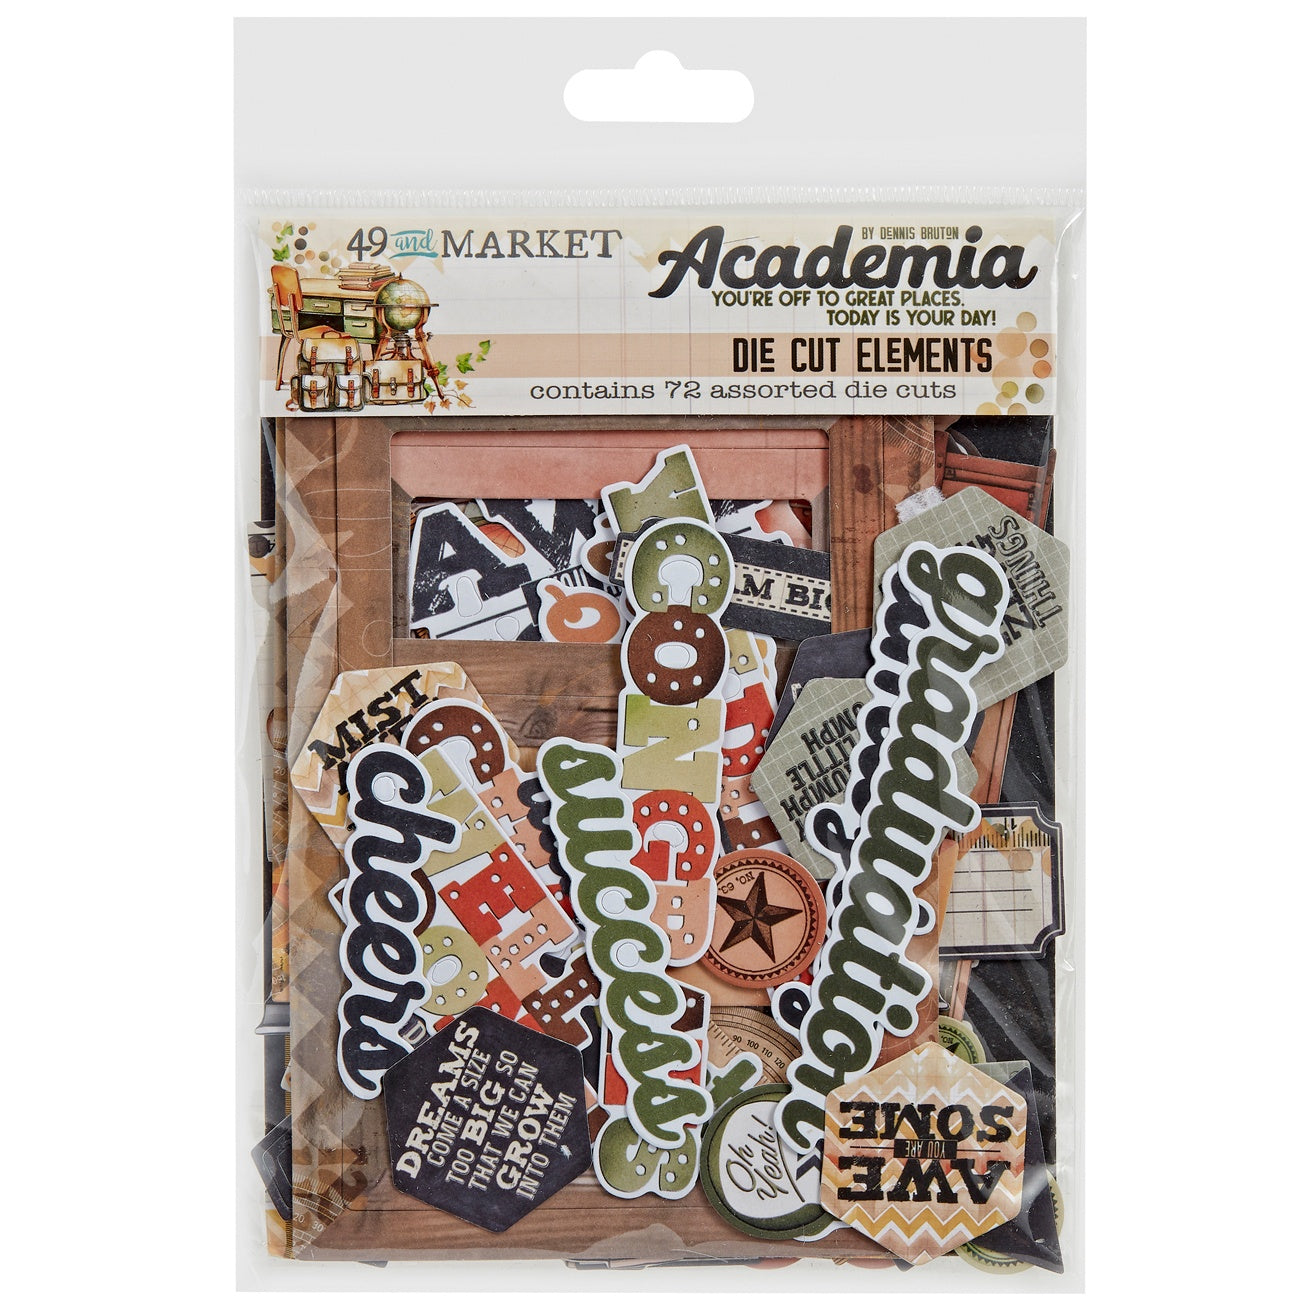 49 and Market - Academia - Die Cut Elements